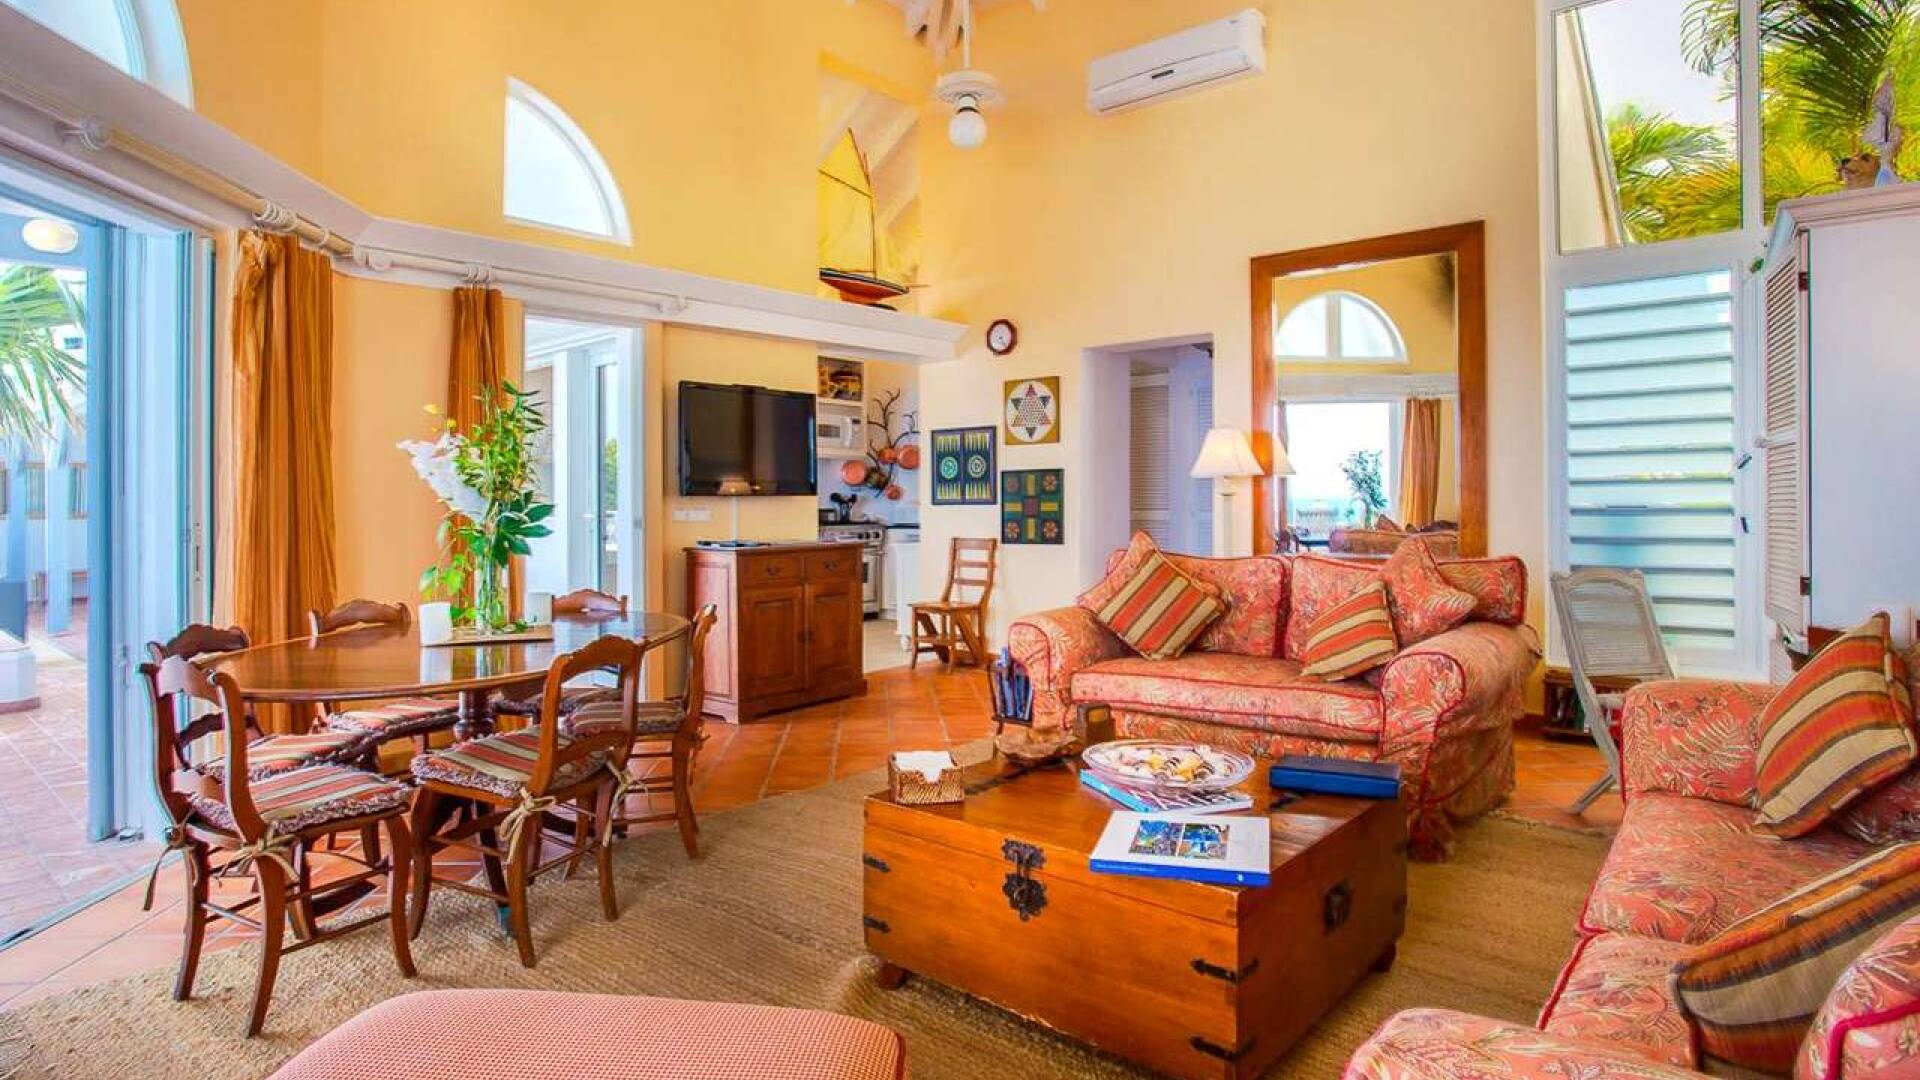 Living Room at WV FRE, Pointe Milou, St. Barthelemy